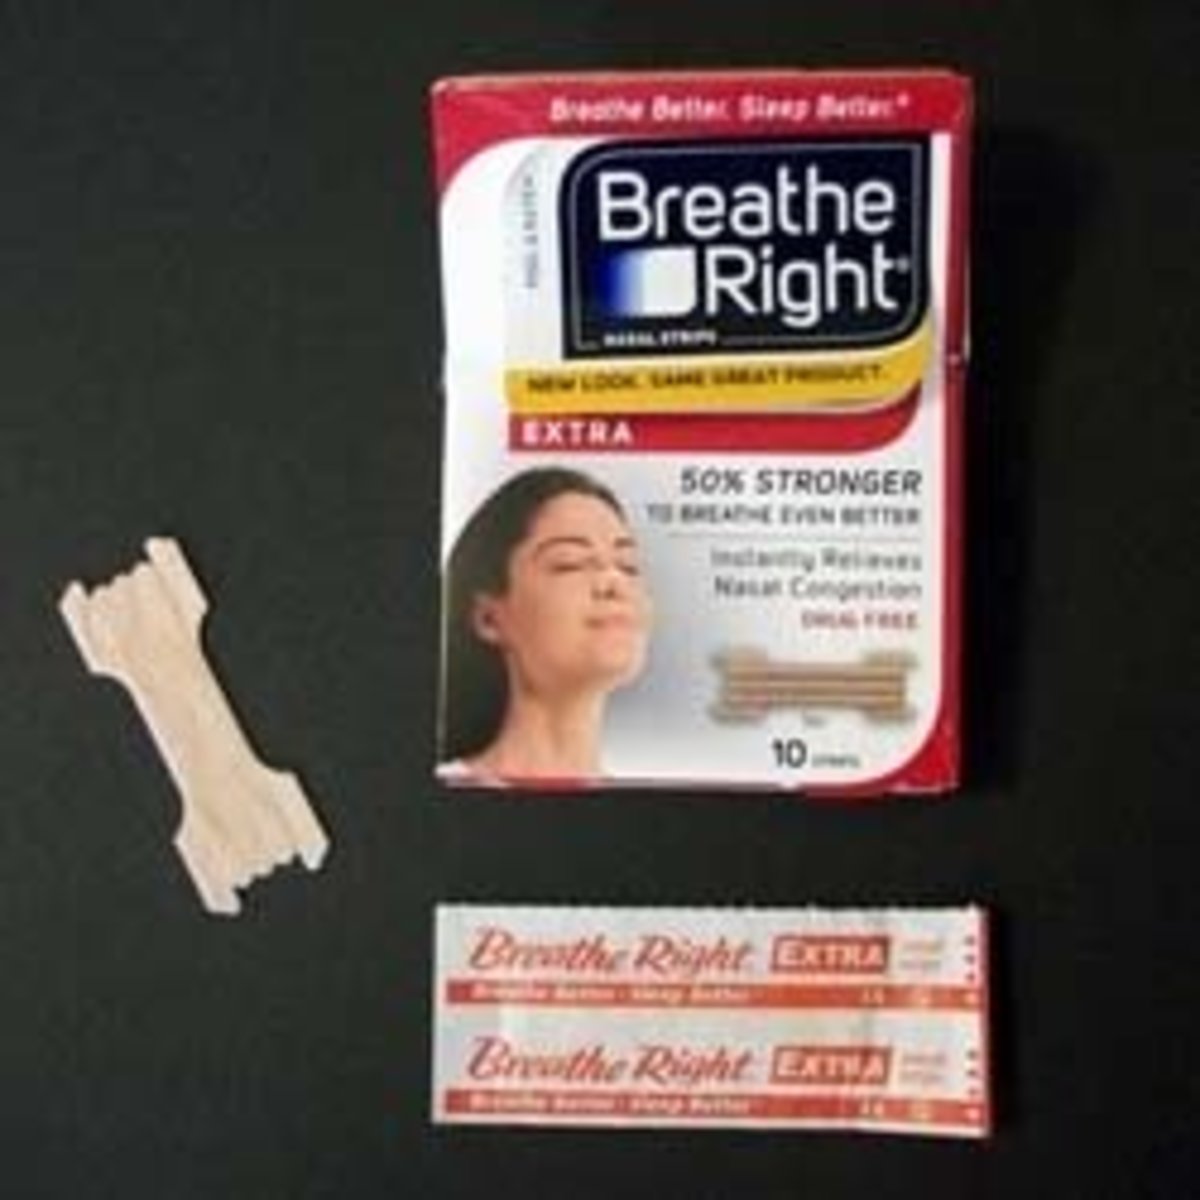 Breathe Right nasal strips have worked better for me than other brands I've tried.